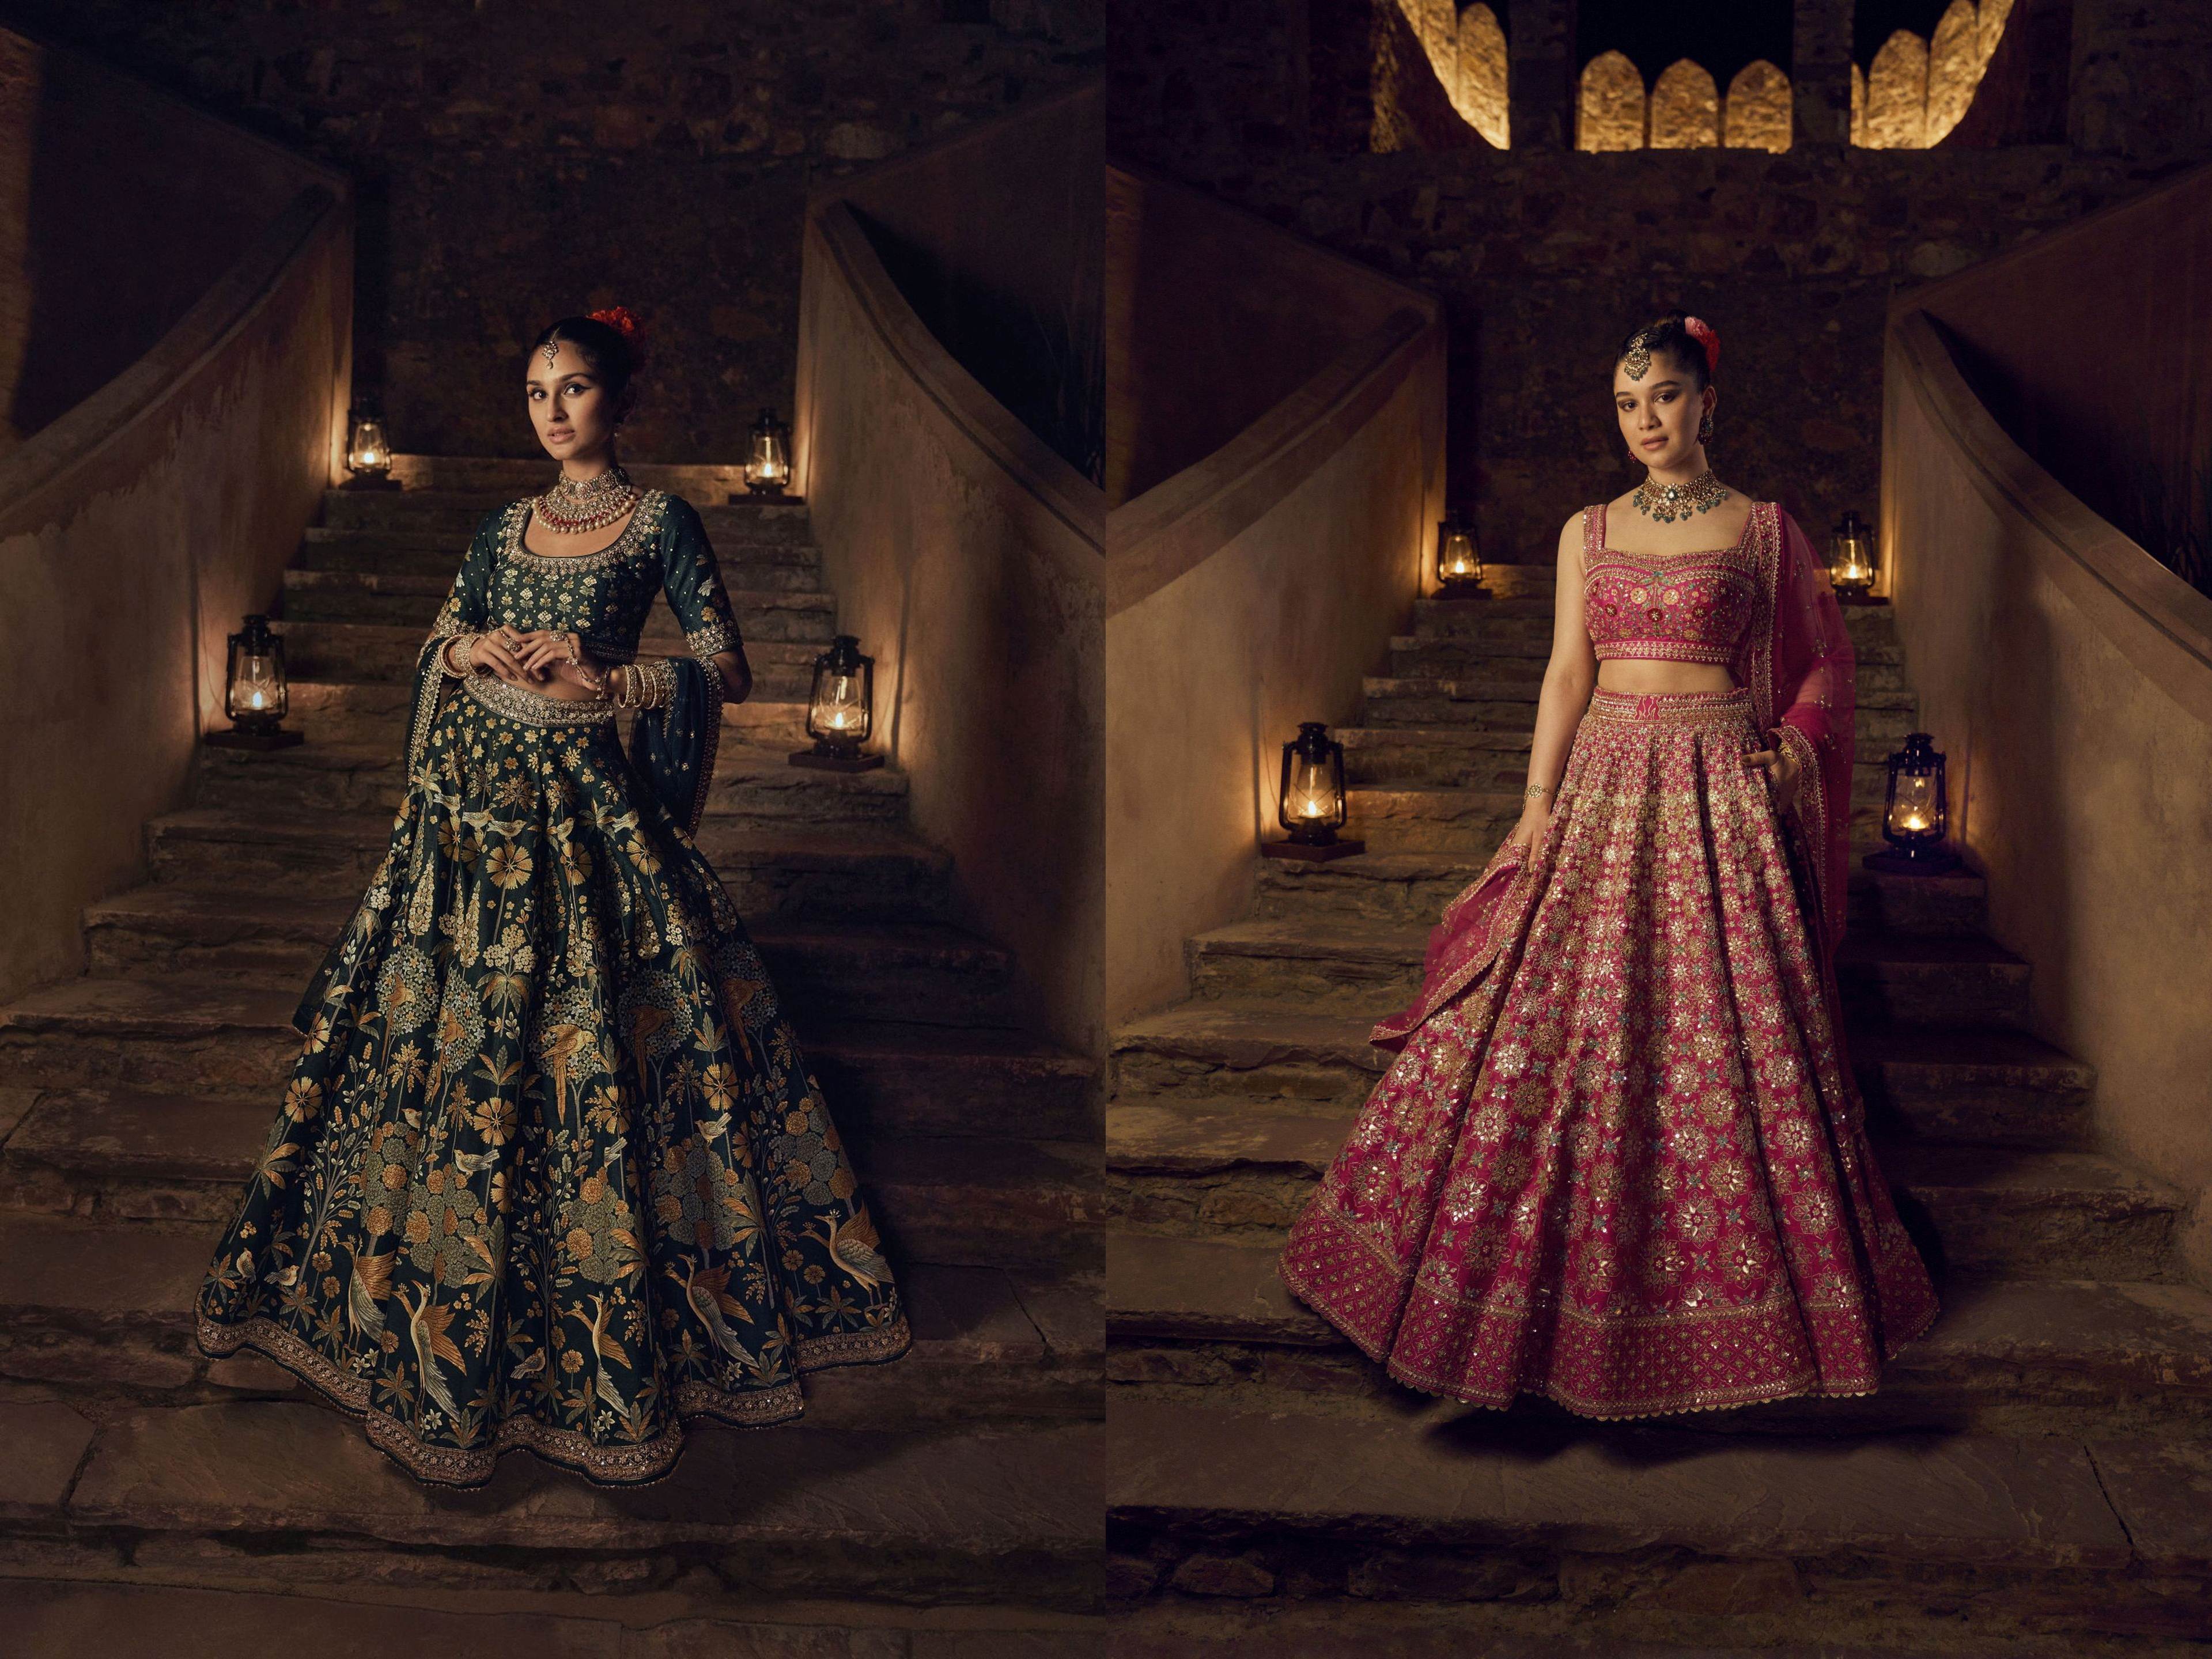 Homage by Anita Dongre